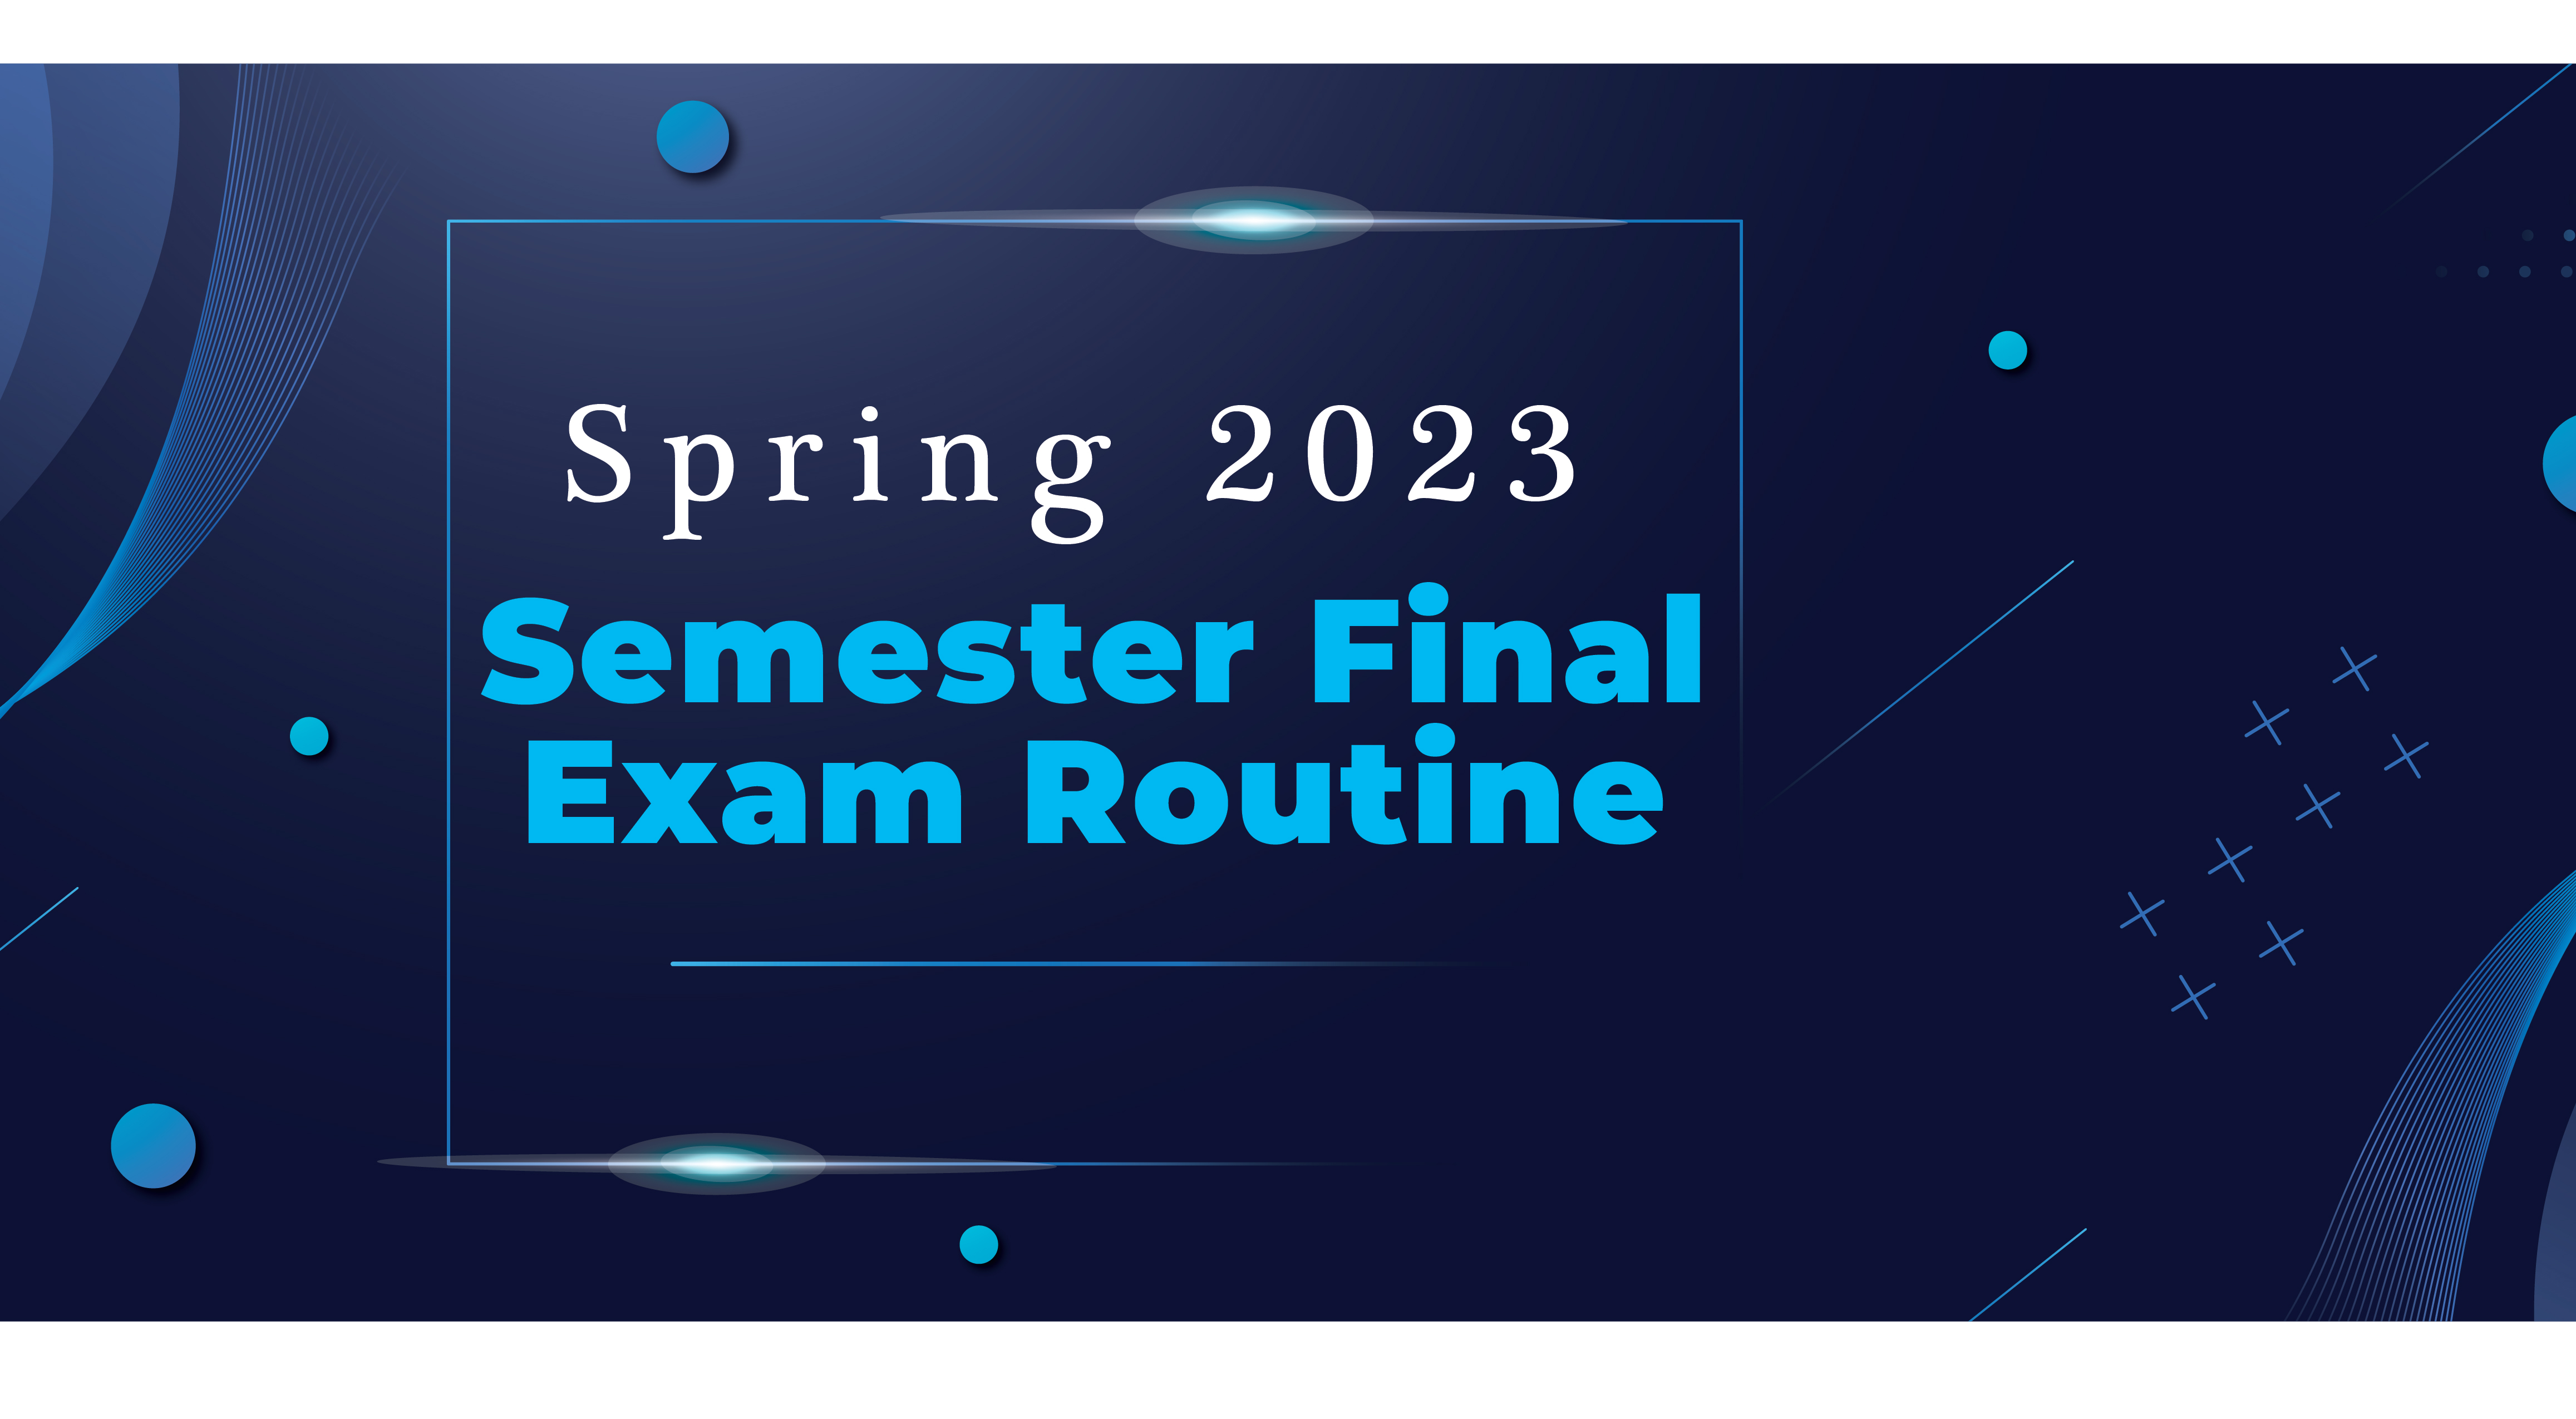 SPRING 2023 SEMESTER FINAL EXAM ROUTINE FOR EDUCATION & TRAINING image